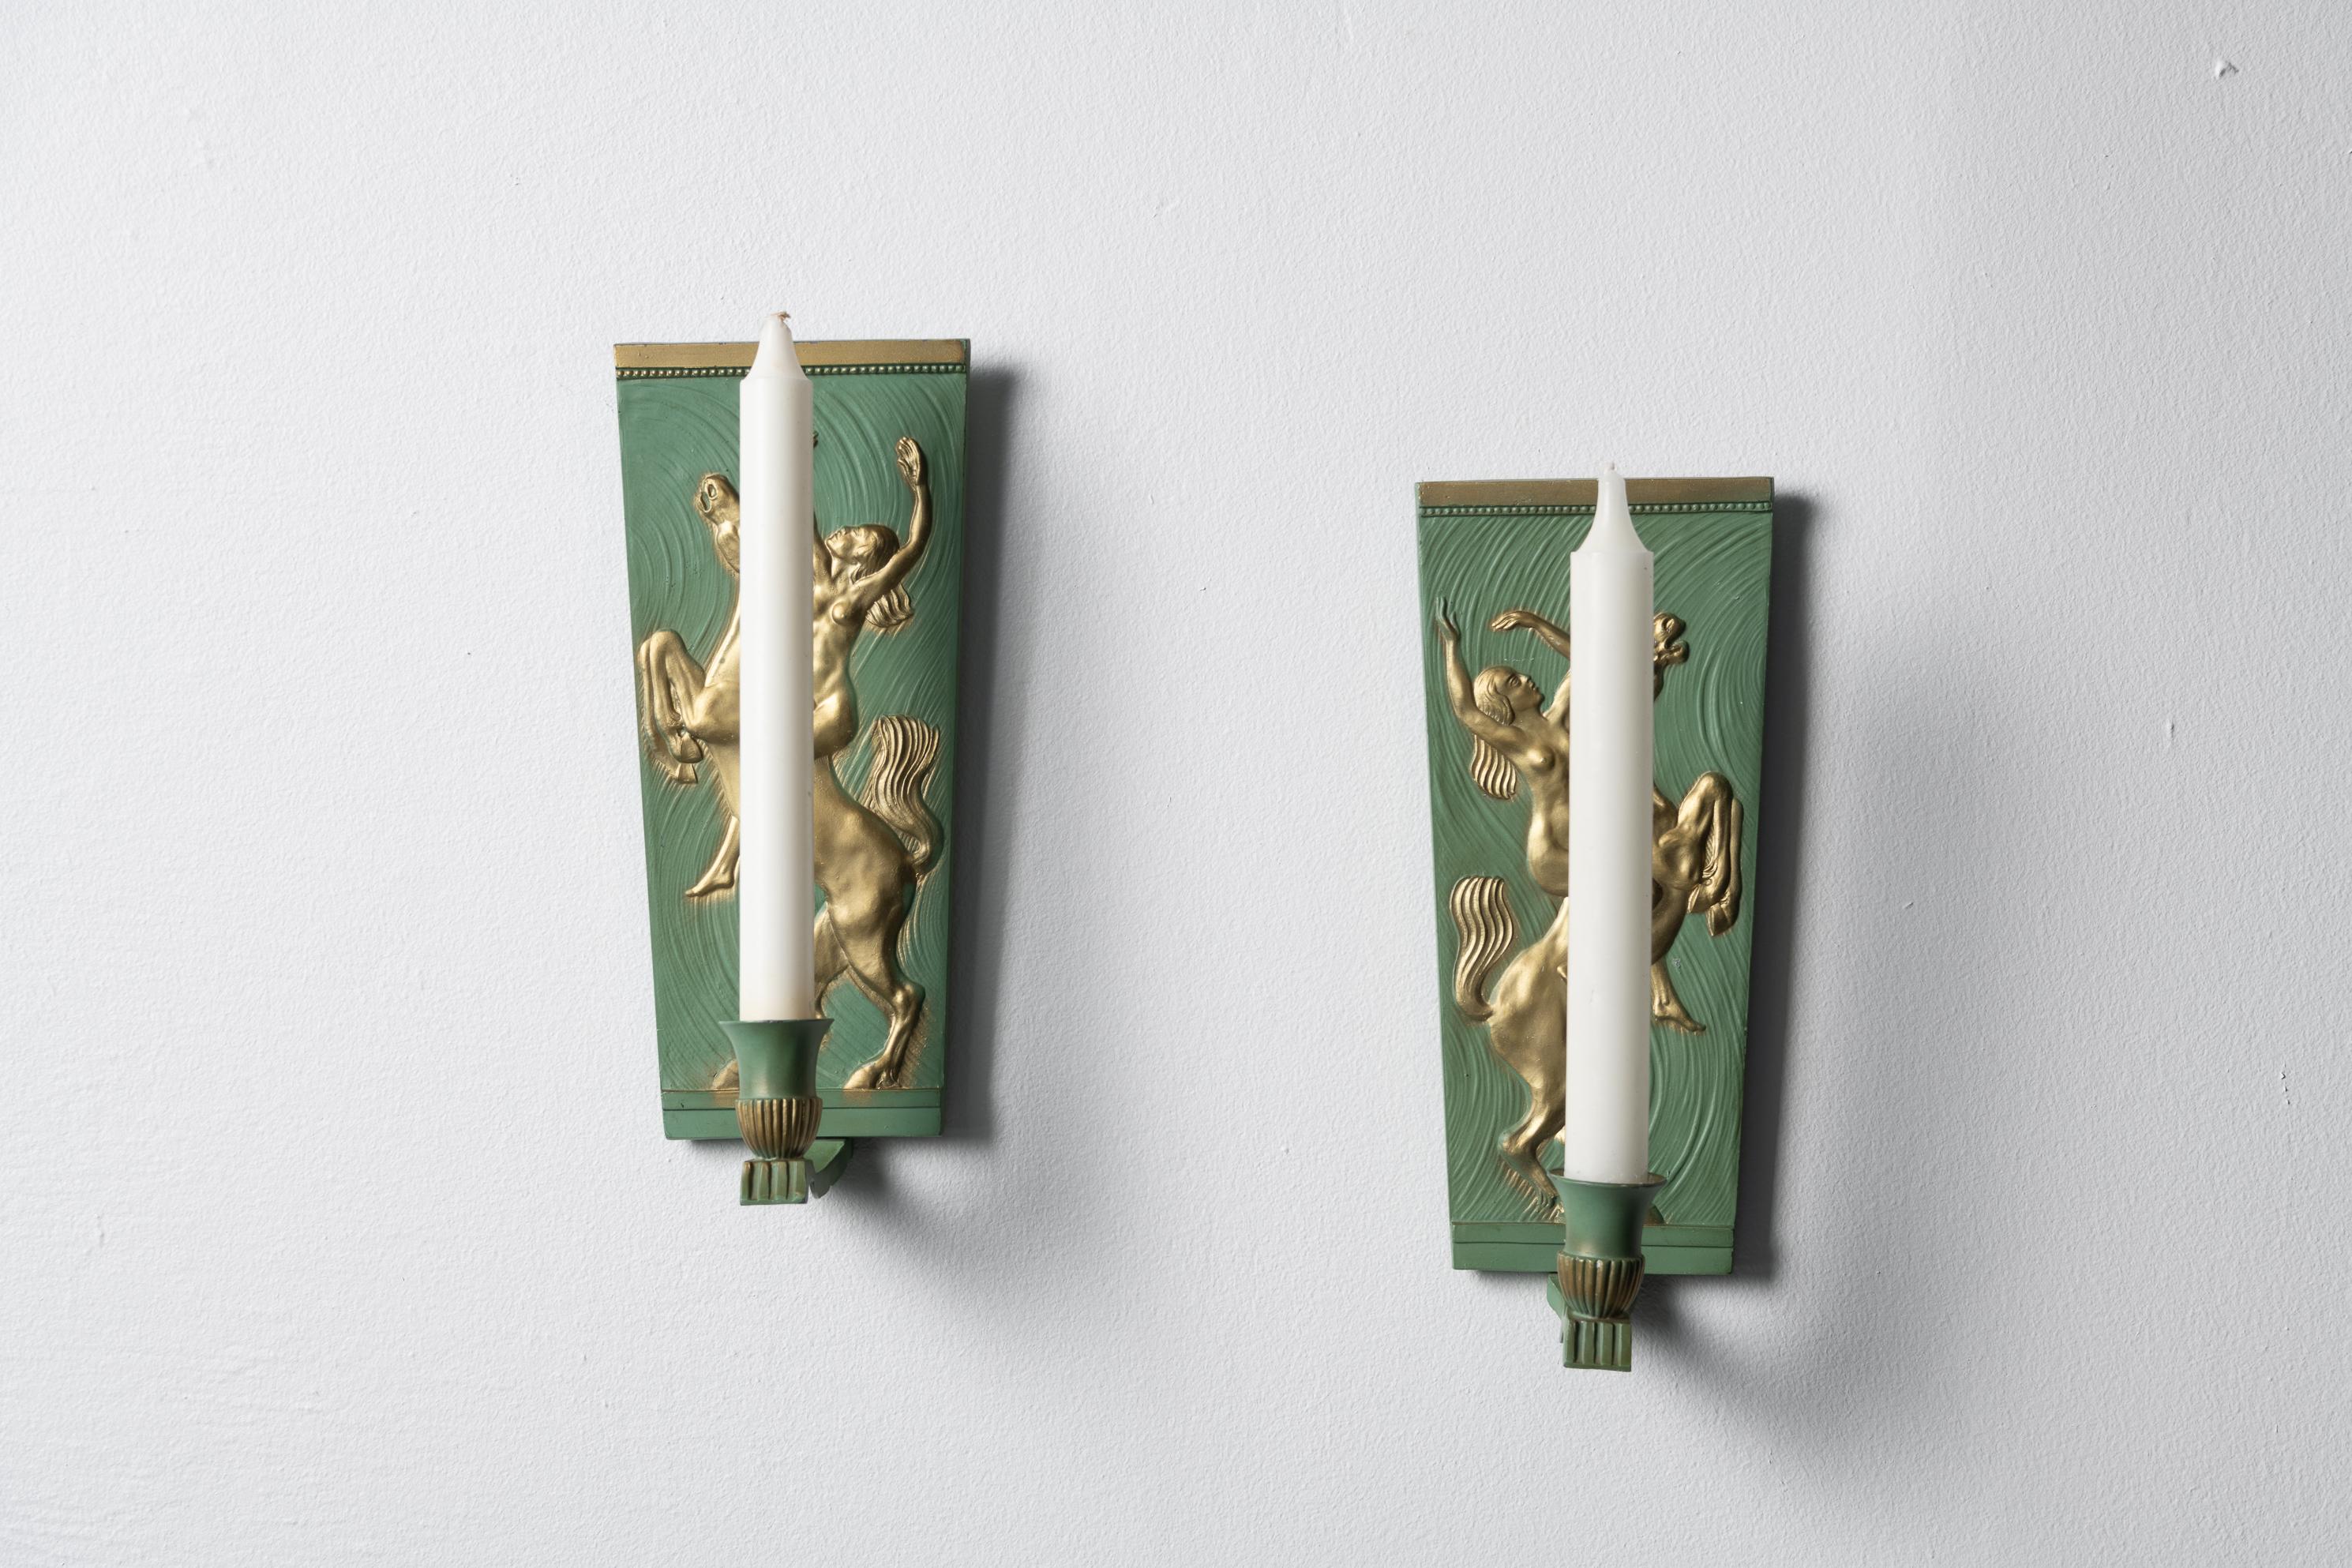 Swedish Art Deco wall lights, or sconces as they are also known, made by Stjärnmetall Ystad in Sweden. The sconces are from the early 20th century, around 1920 to 1930 and are made in a metal alloy. The pair of sconces have a unique imagery and